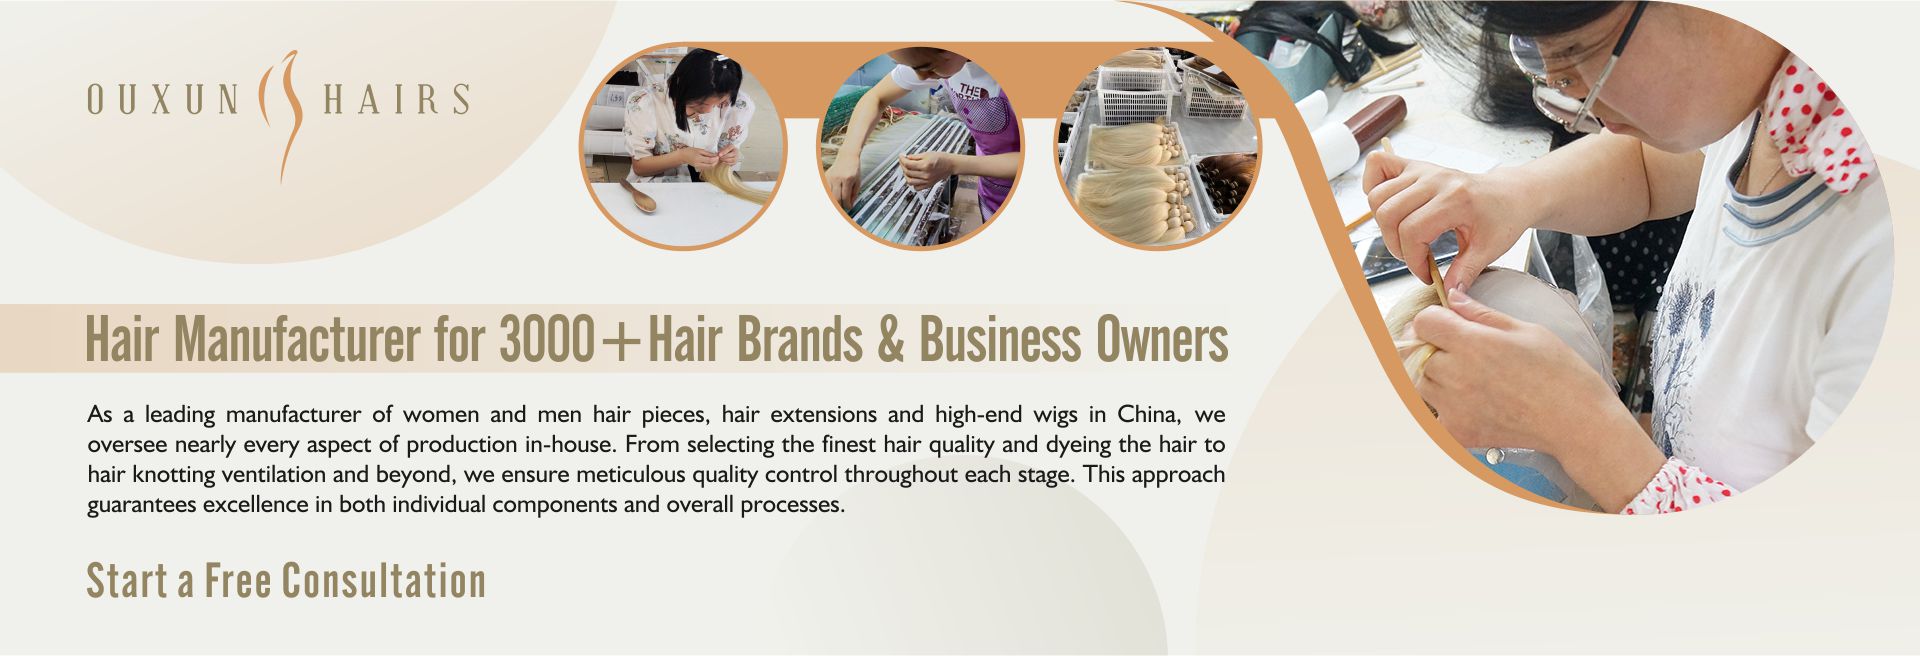 Women’s Wig Products